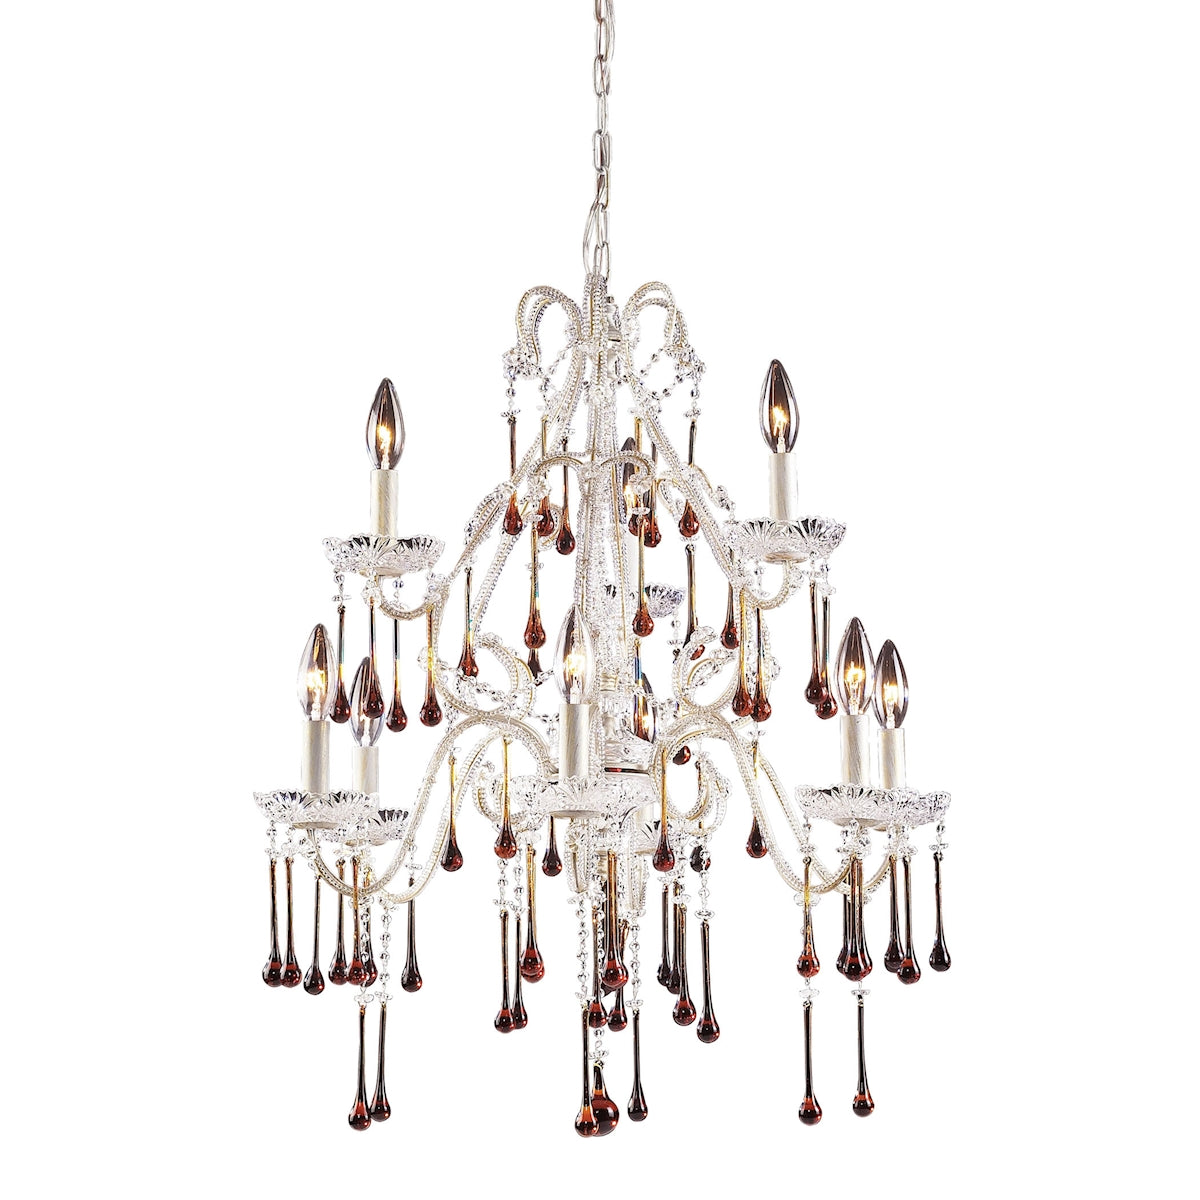 ELK Lighting 4003/6+3AMB Opulence 9-Light Chandelier in Antique White with Amber Crystals